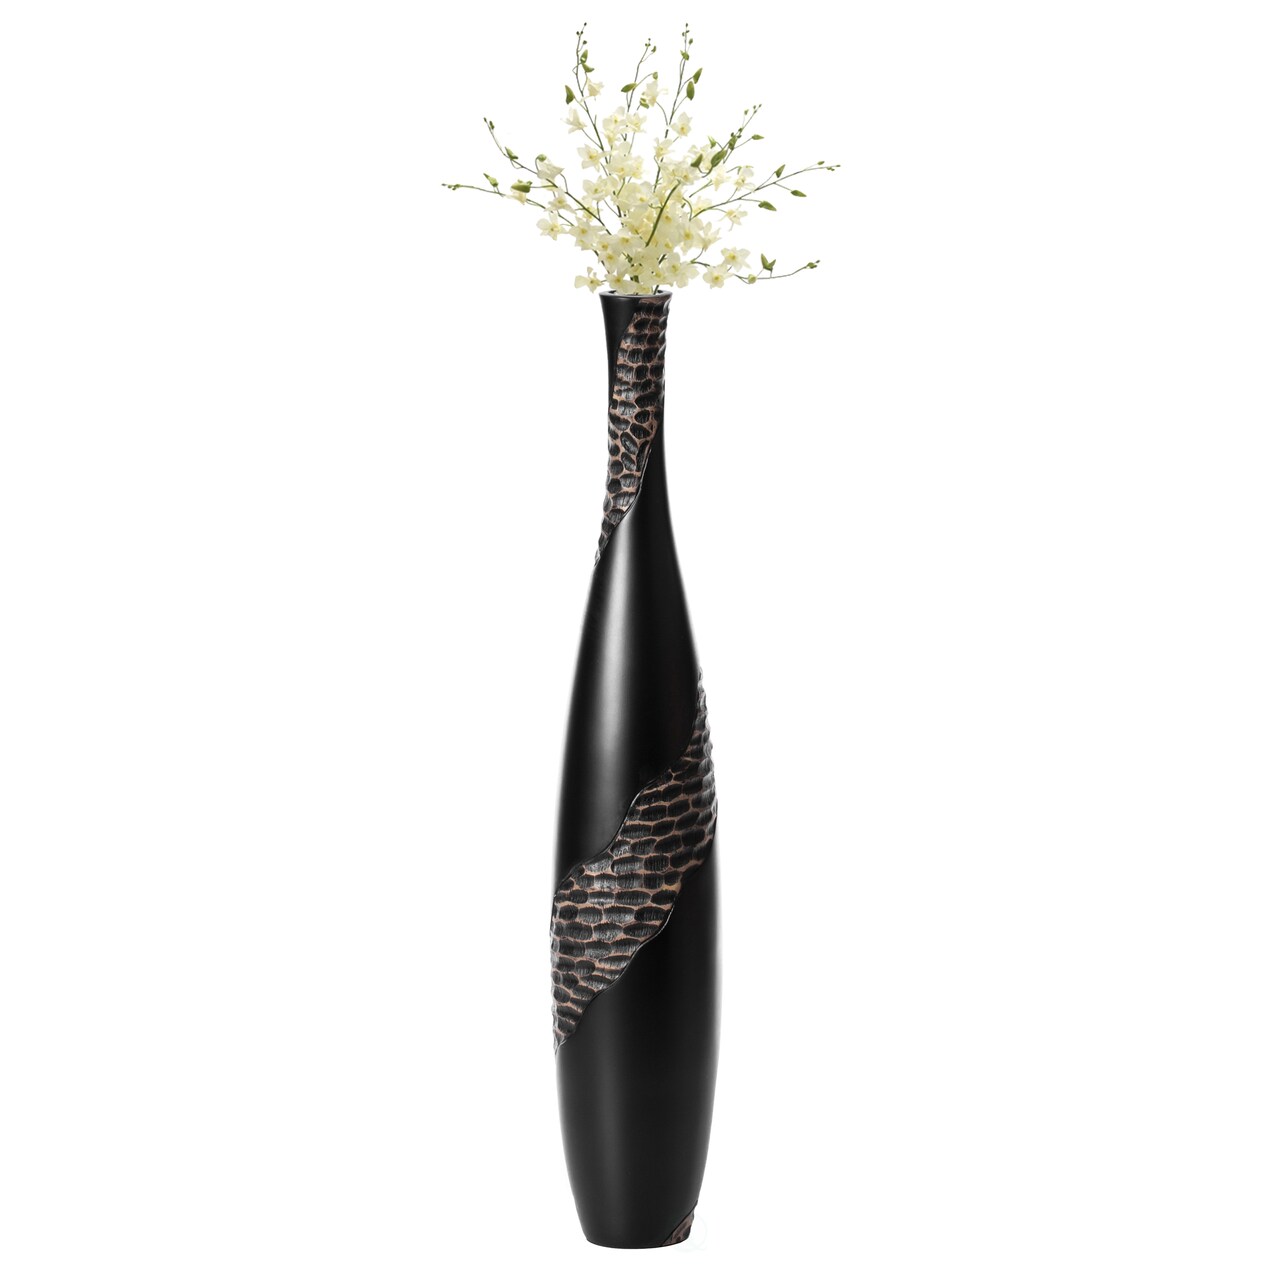 Contemporary Bottle Shape Decorative Floor Vase, Brown with Cobbled Stone Pattern